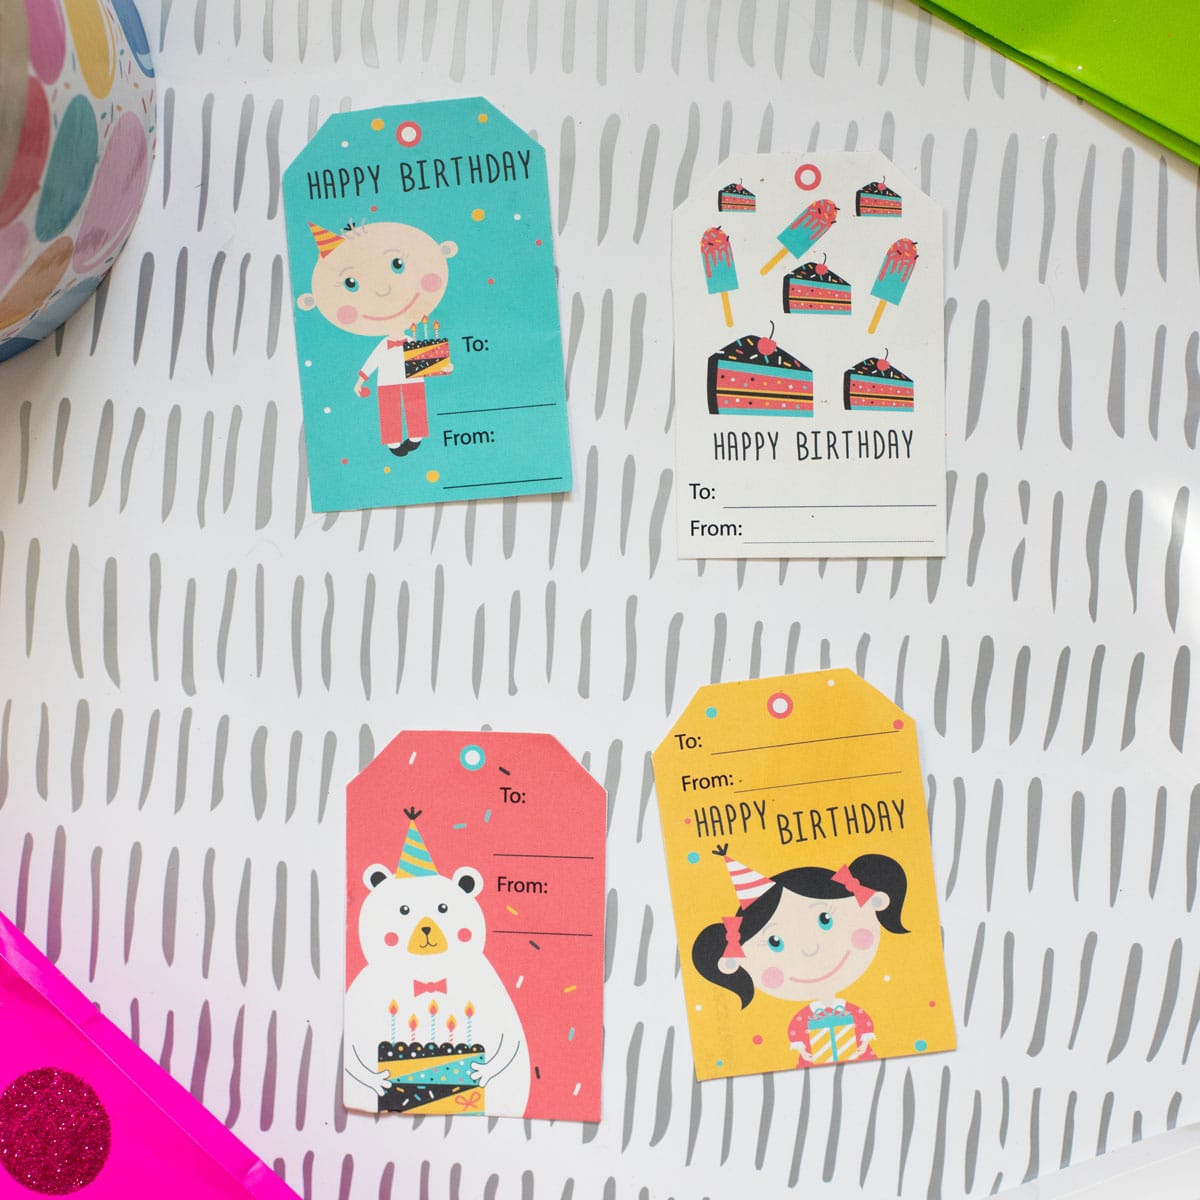 All Occasion Personalized Gift Tags - 3 pack - Tags for Birthday